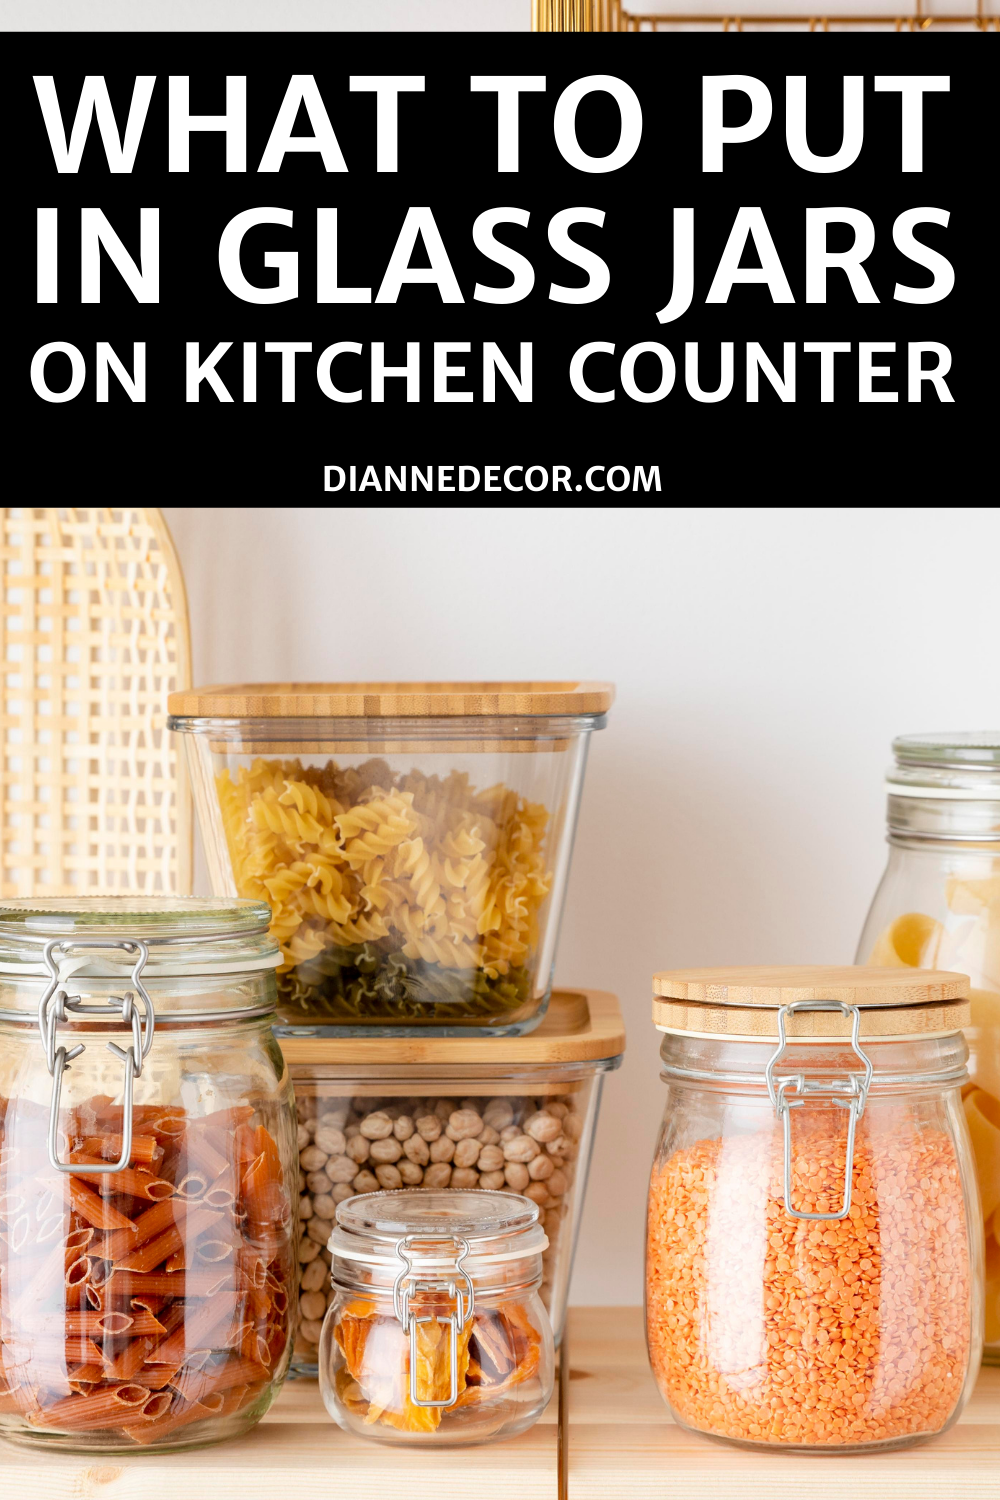 What To Put In Large Glass Jars On Your Kitchen Counter?